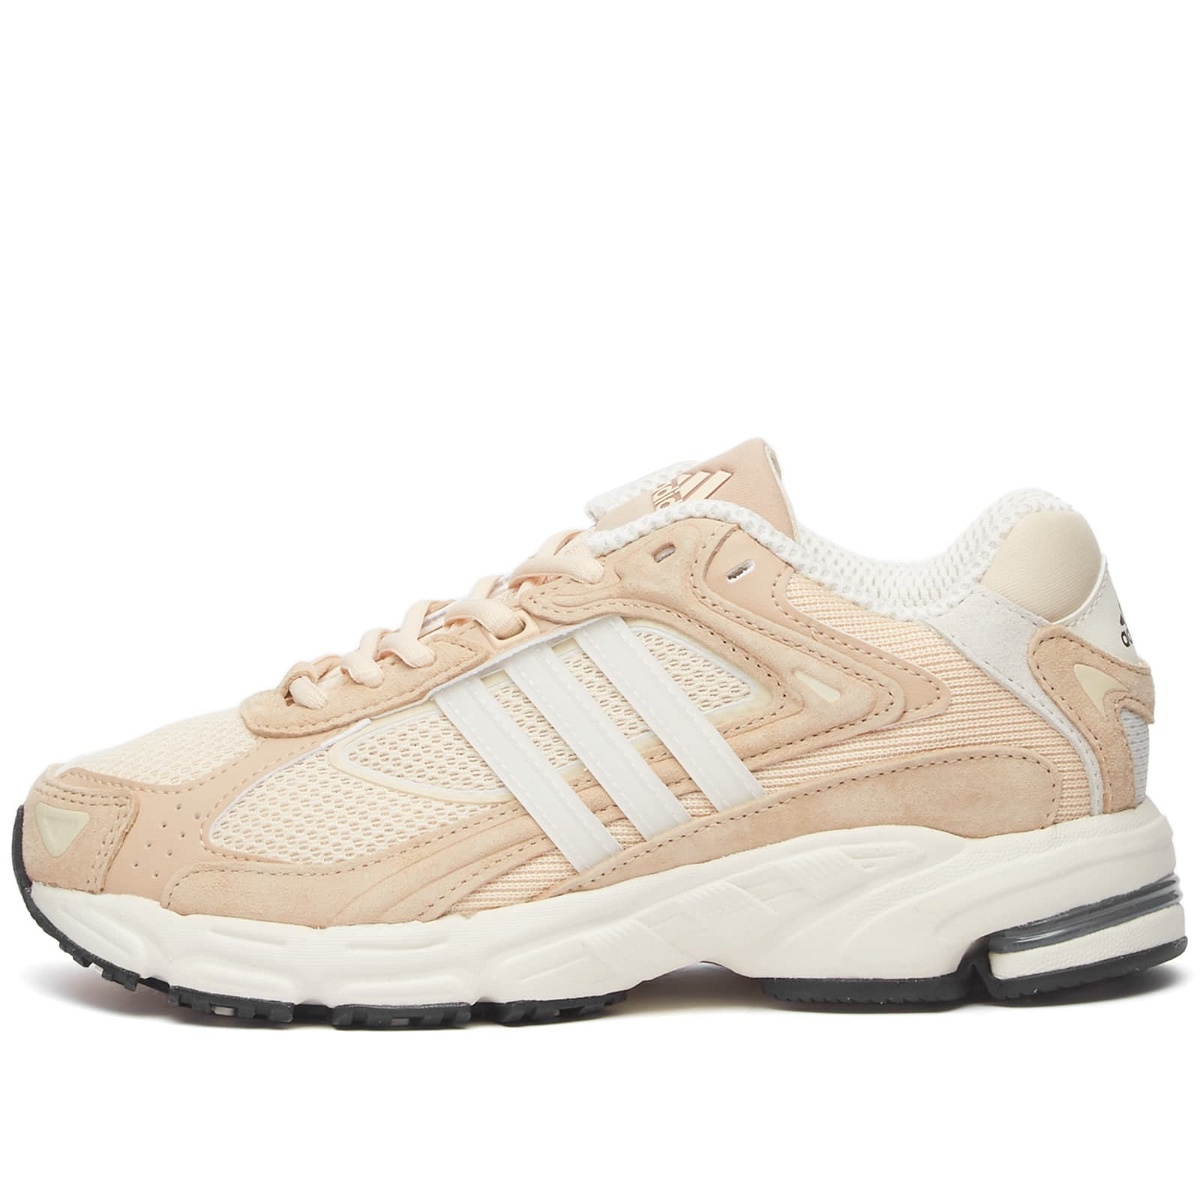 Sneakers CL adidas Response White/Beige Sand/Off in Adidas